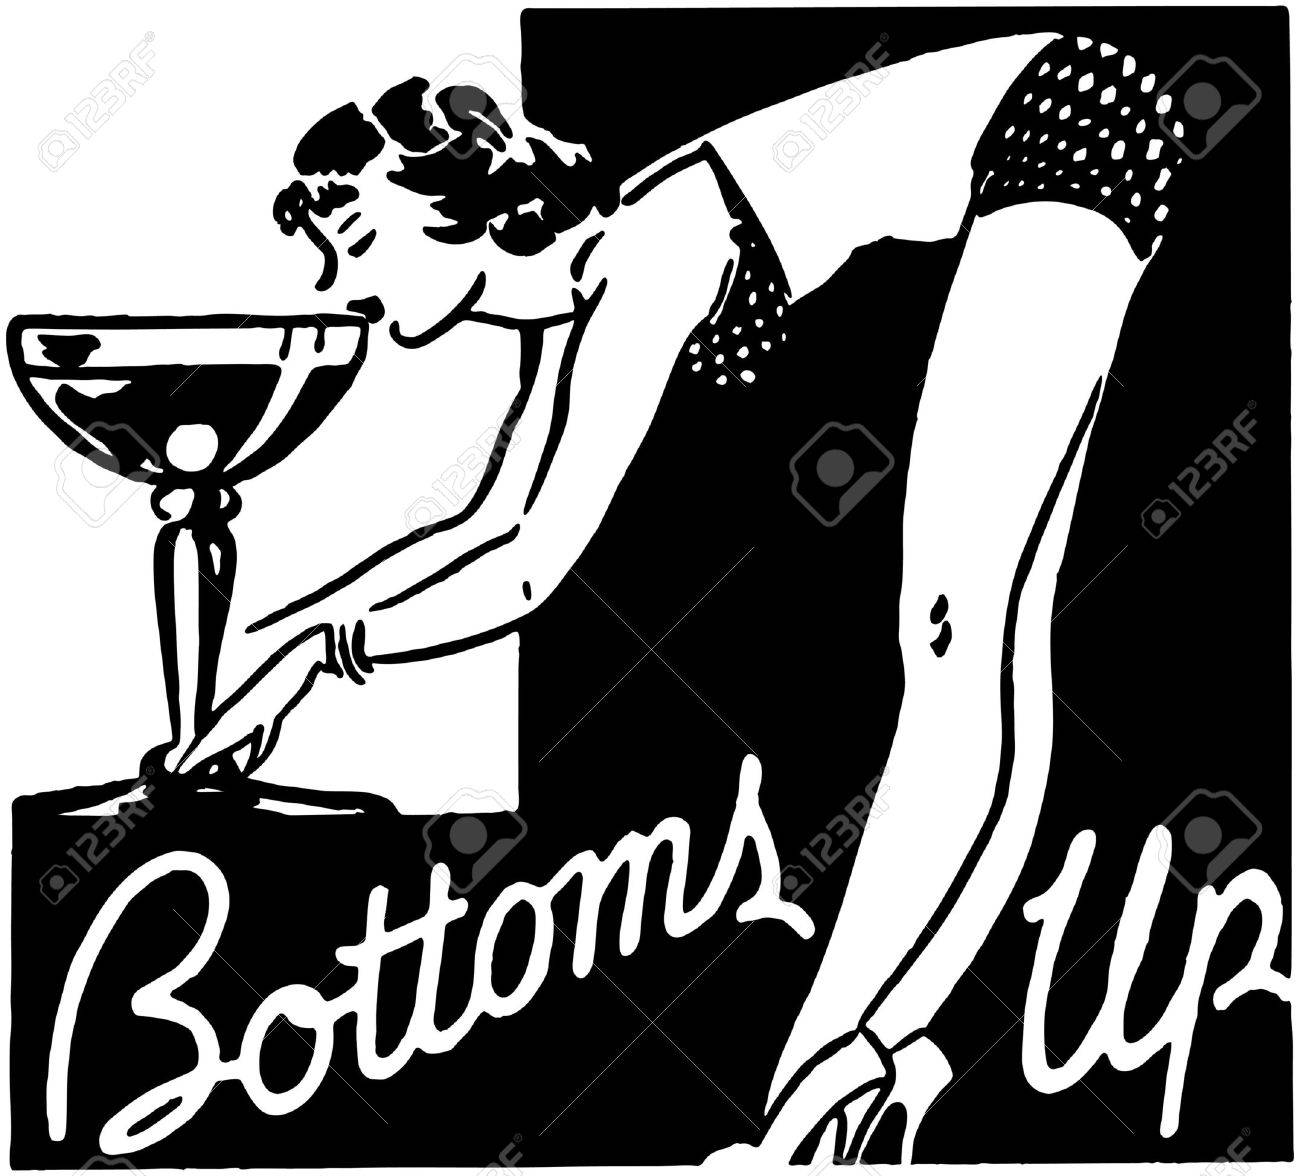 dada lin recommends bottoms up pic pic